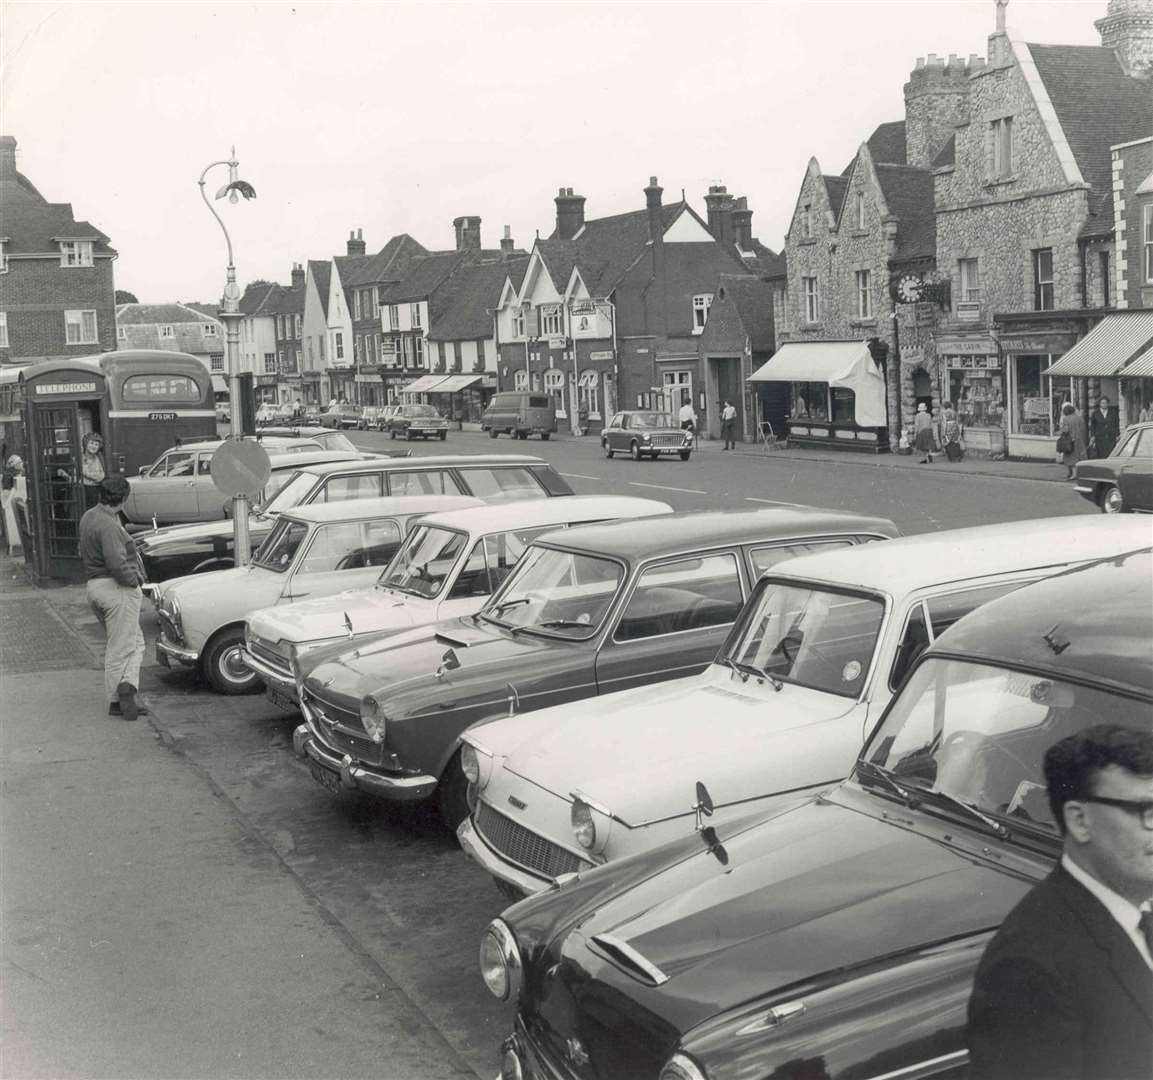 High Street in West Malling in August 1969